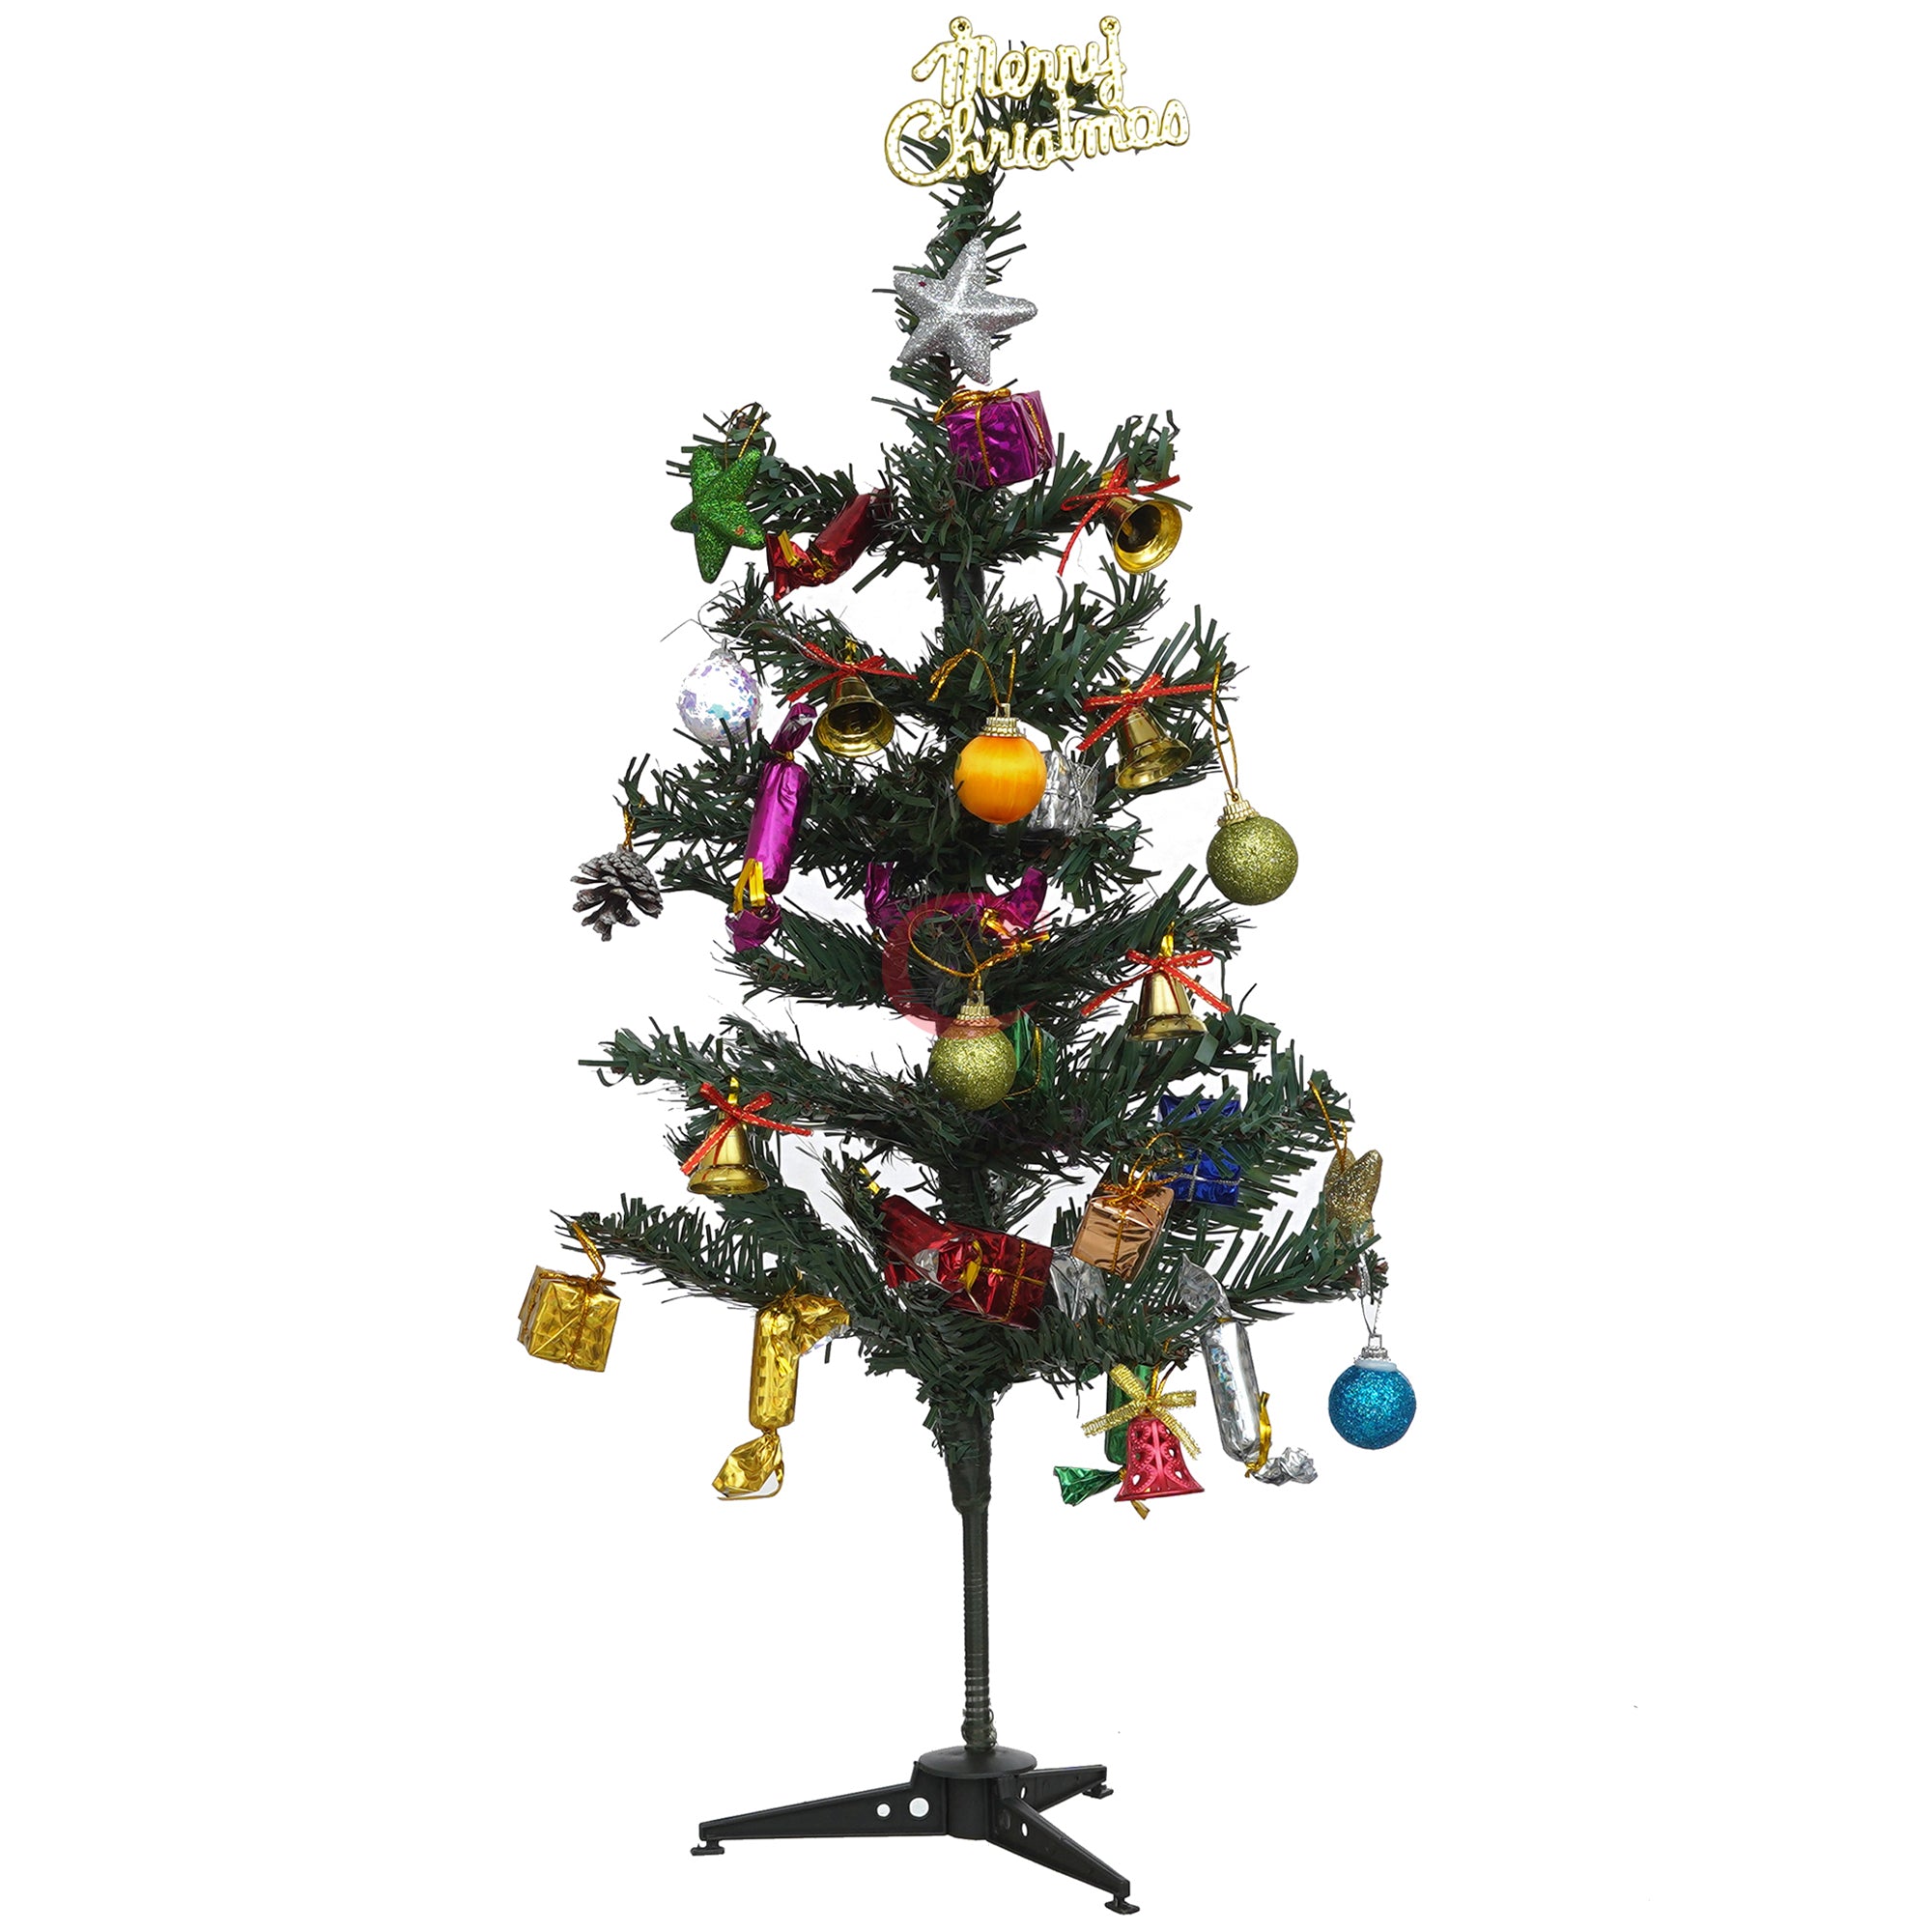 eCraftIndia 2 Feet Green Artificial Christmas Tree Xmas Pine Tree with Stand and 60 Christmas Decoration Ornaments Props - Merry Christmas Decoration Item for Home, Office, and Church 6